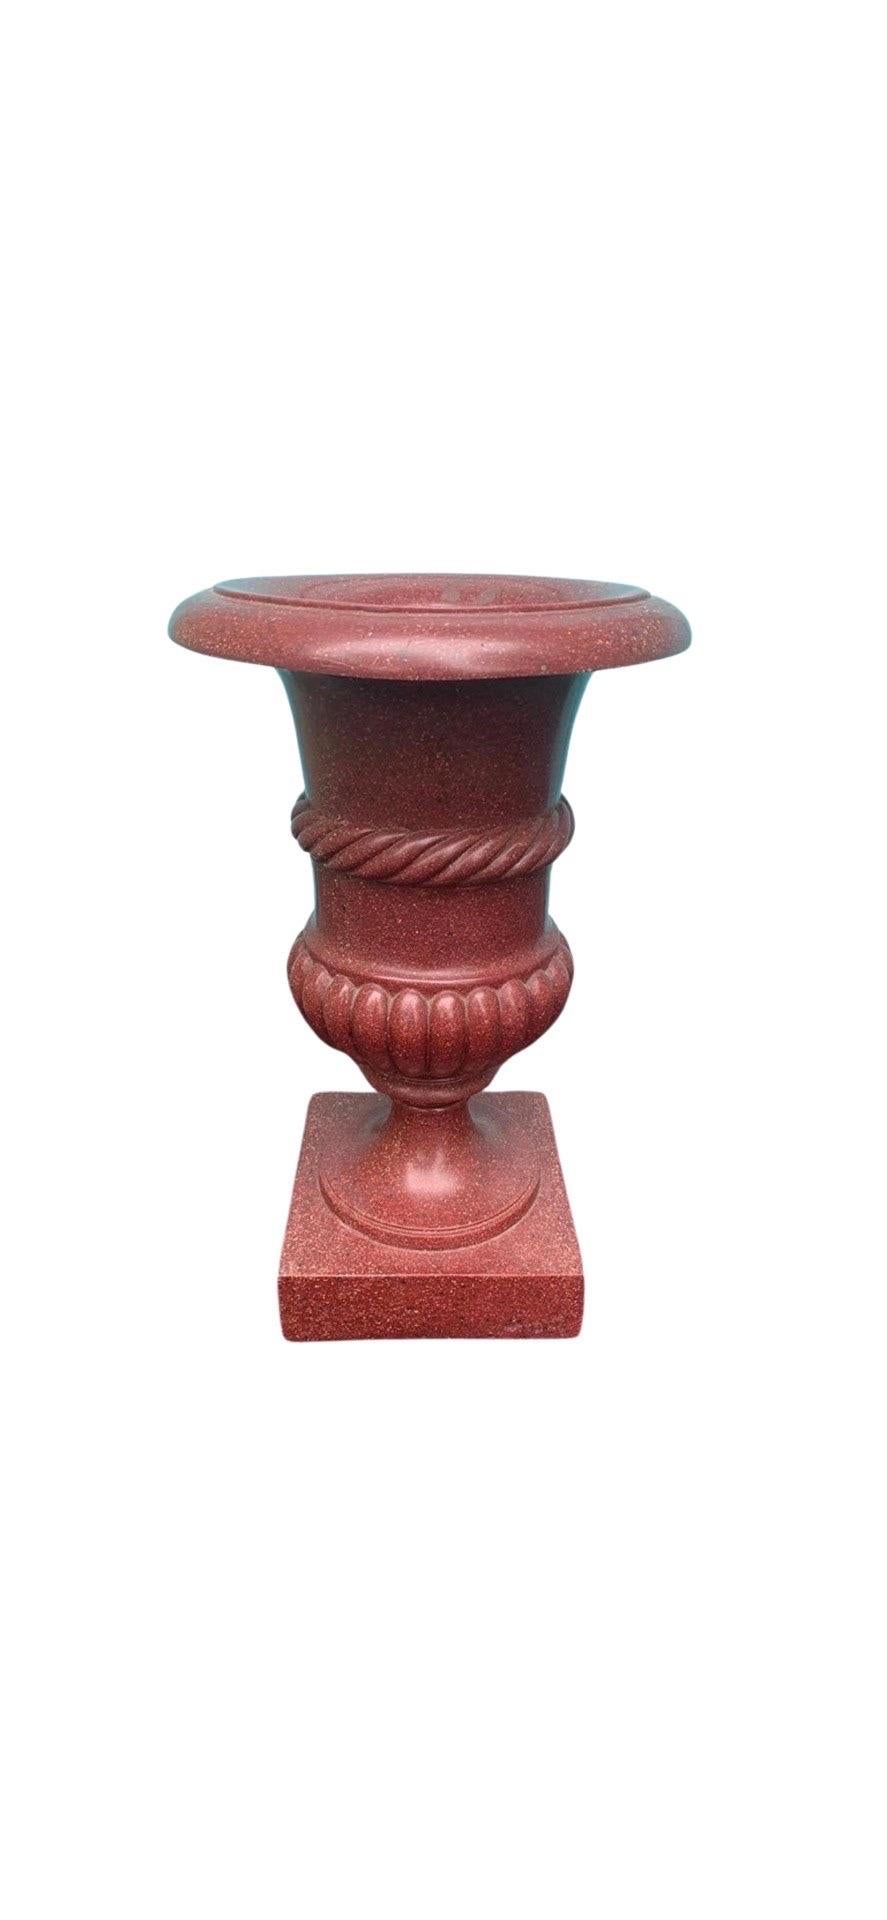 A vintage Grand Tour style Neoclassical Urn. The urn made of a Faux porphyry marble with carved surface and an open top for floral arrangements.